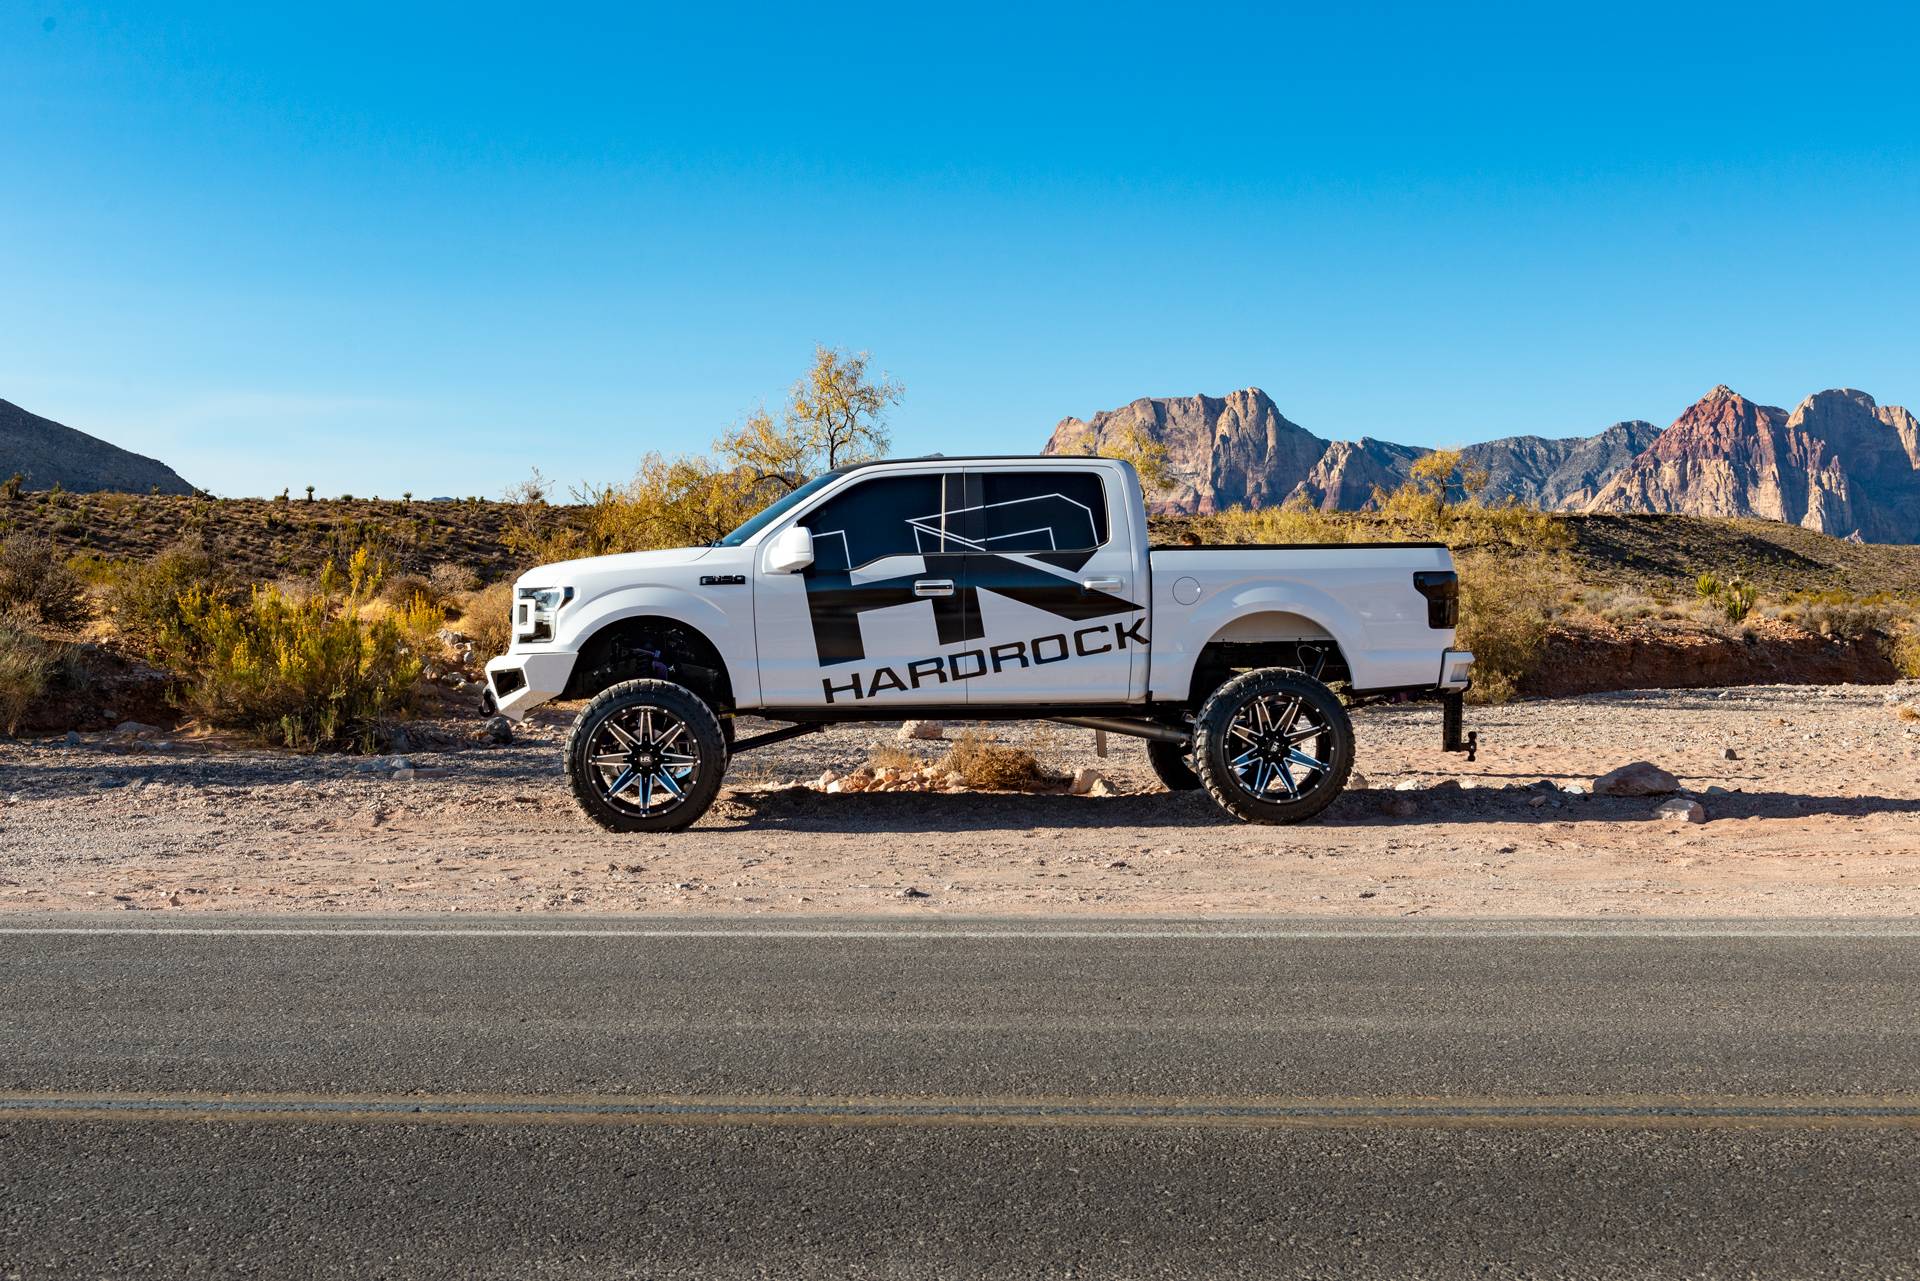 HardRock Offroad Aftermarket Offroad Wheels On a Lifted Ford F150